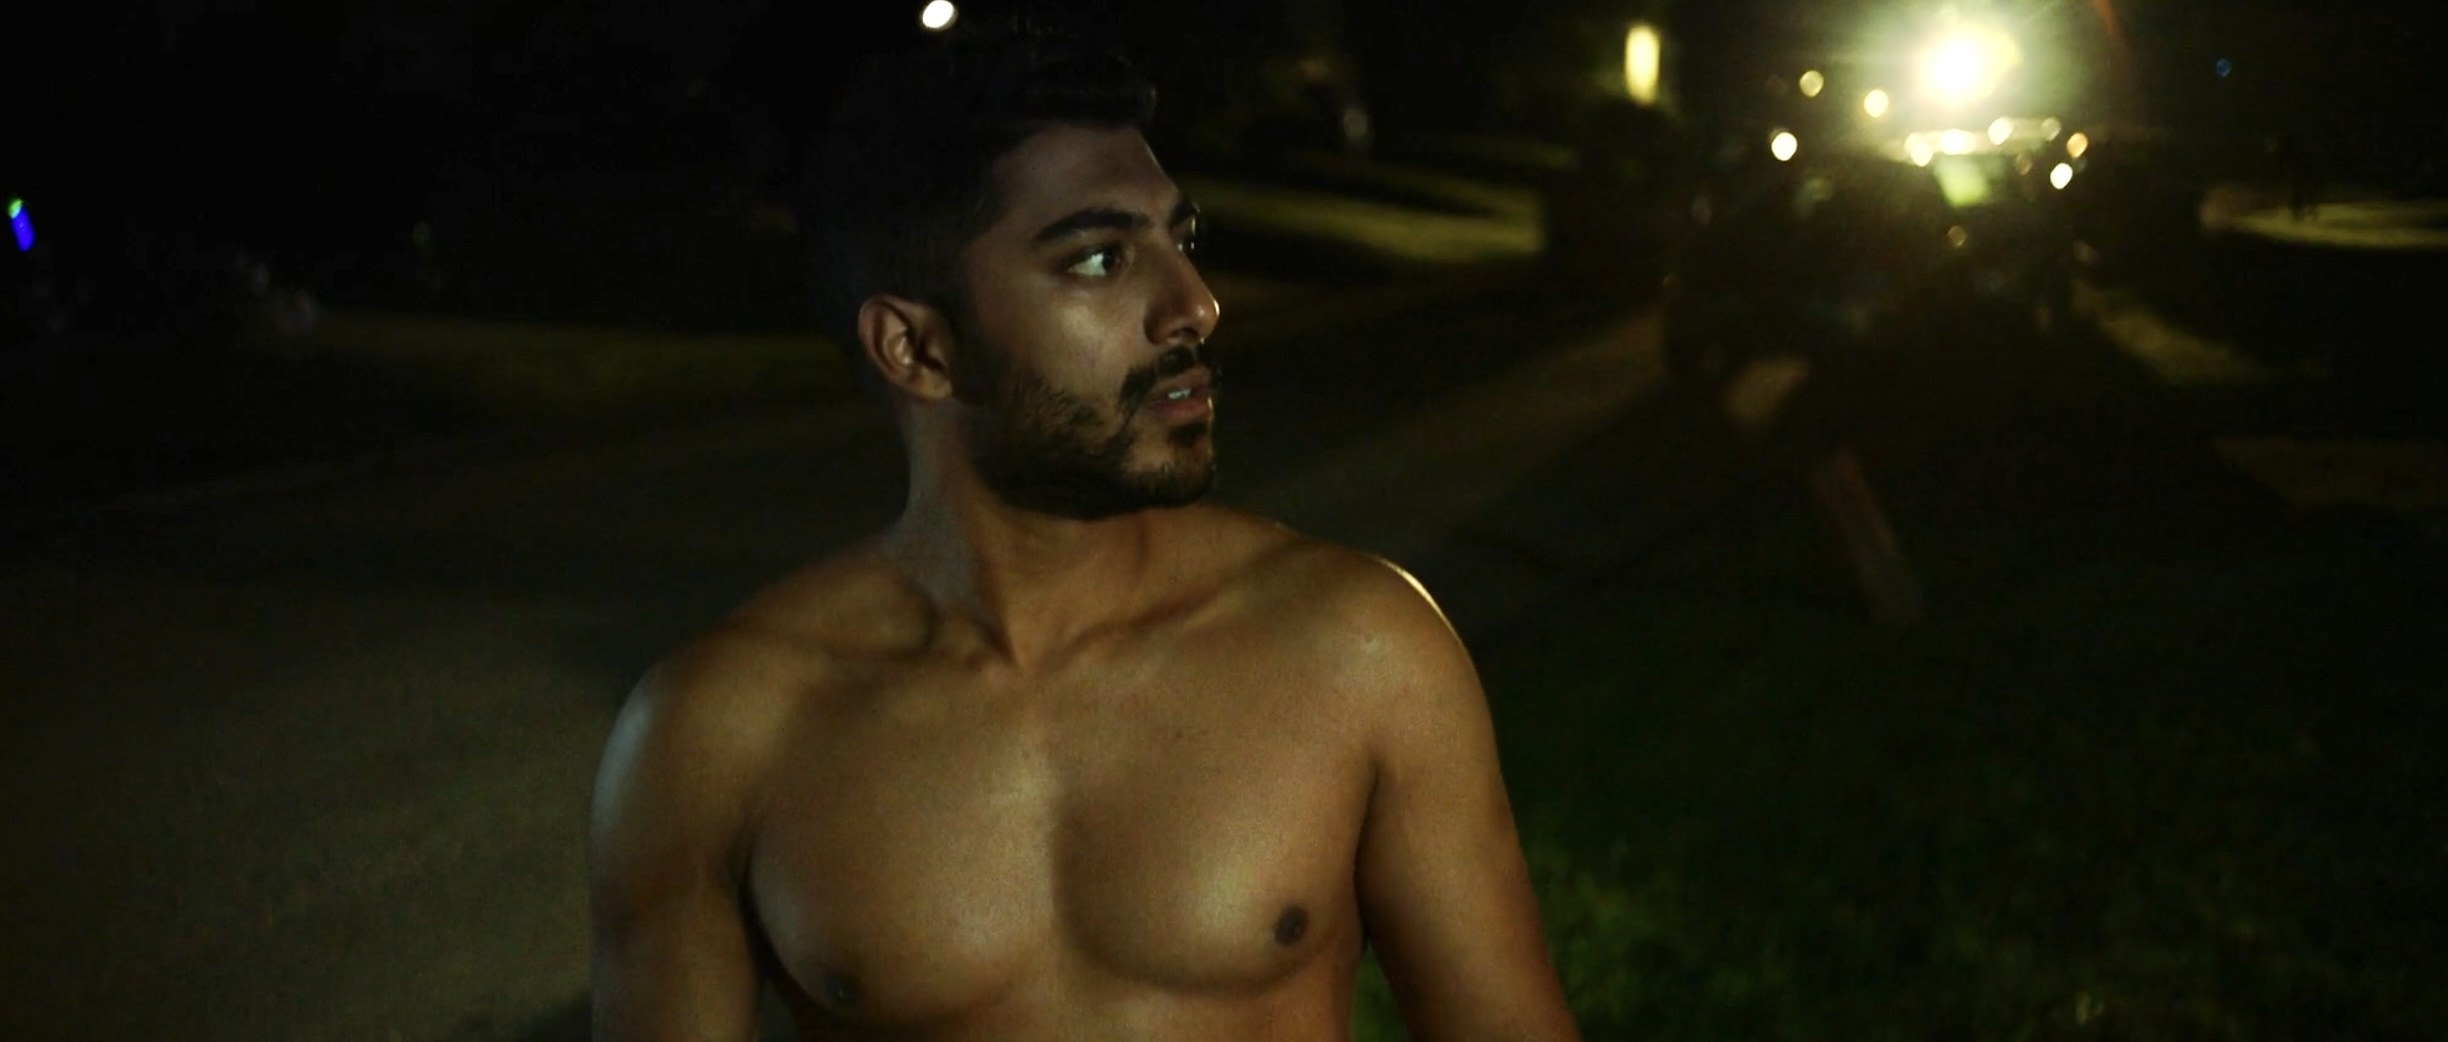 Sonny shirtless in the street